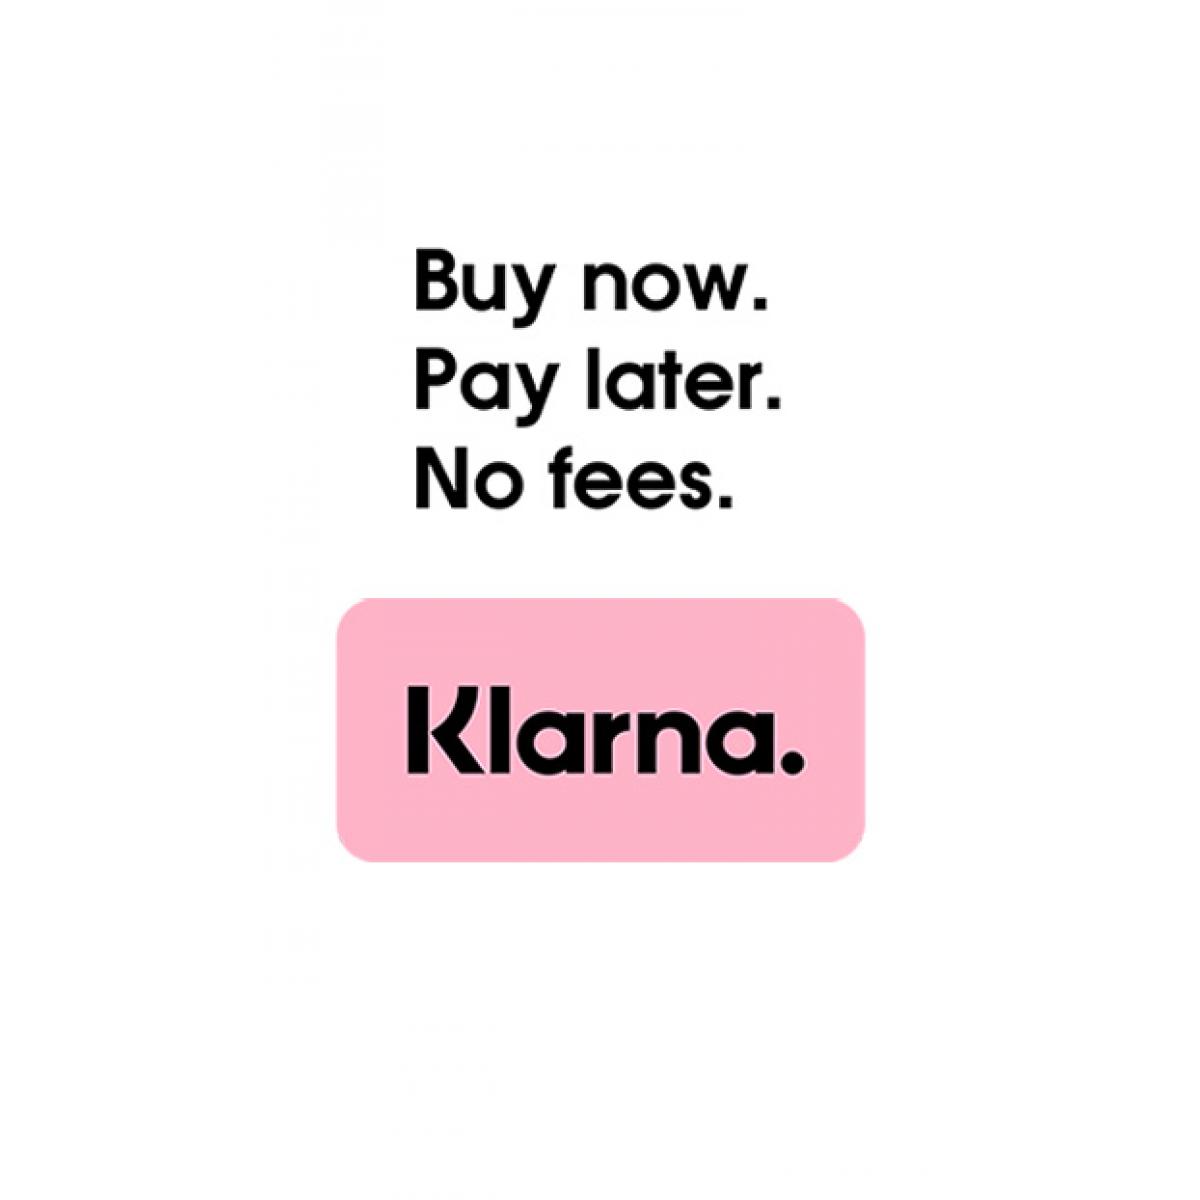 Klarna-banner-buy-now-pay-later-no-fees